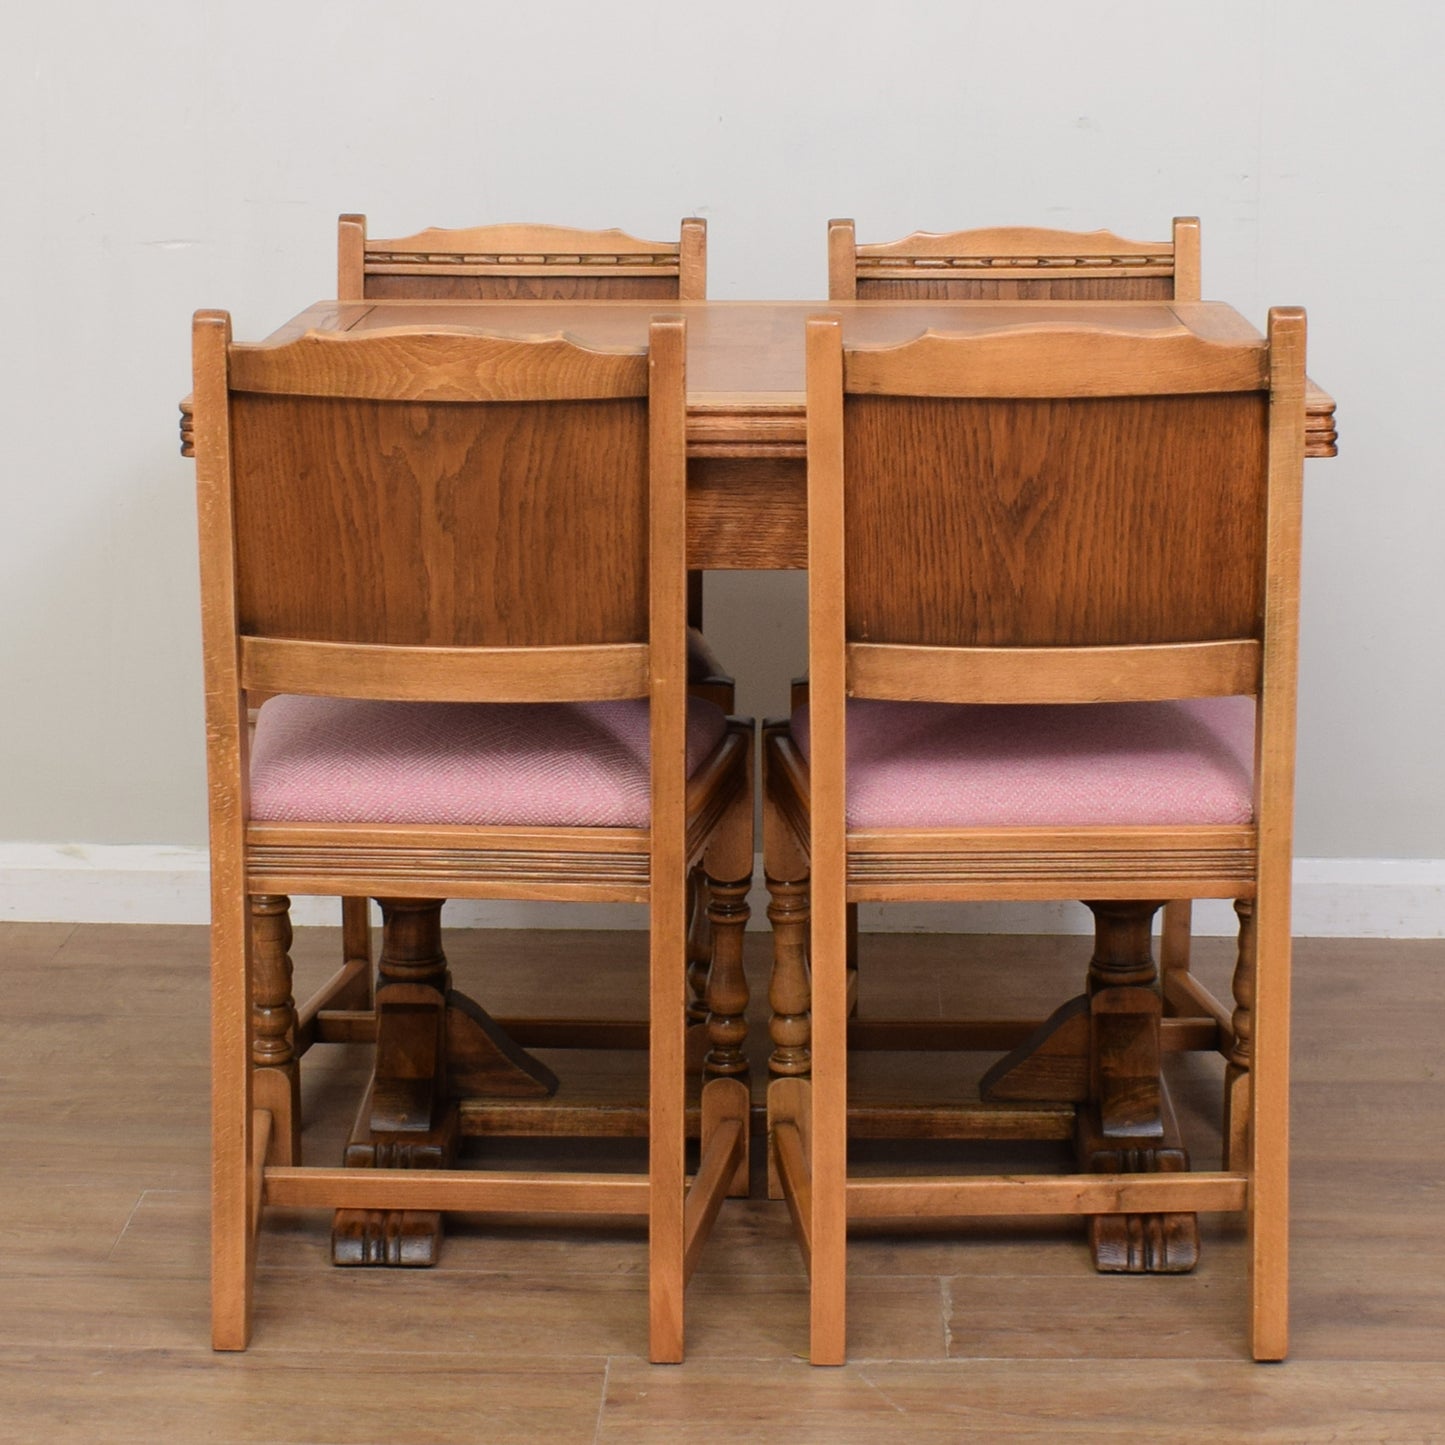 Restored Oak Draw Leaf Table And Four Chairs